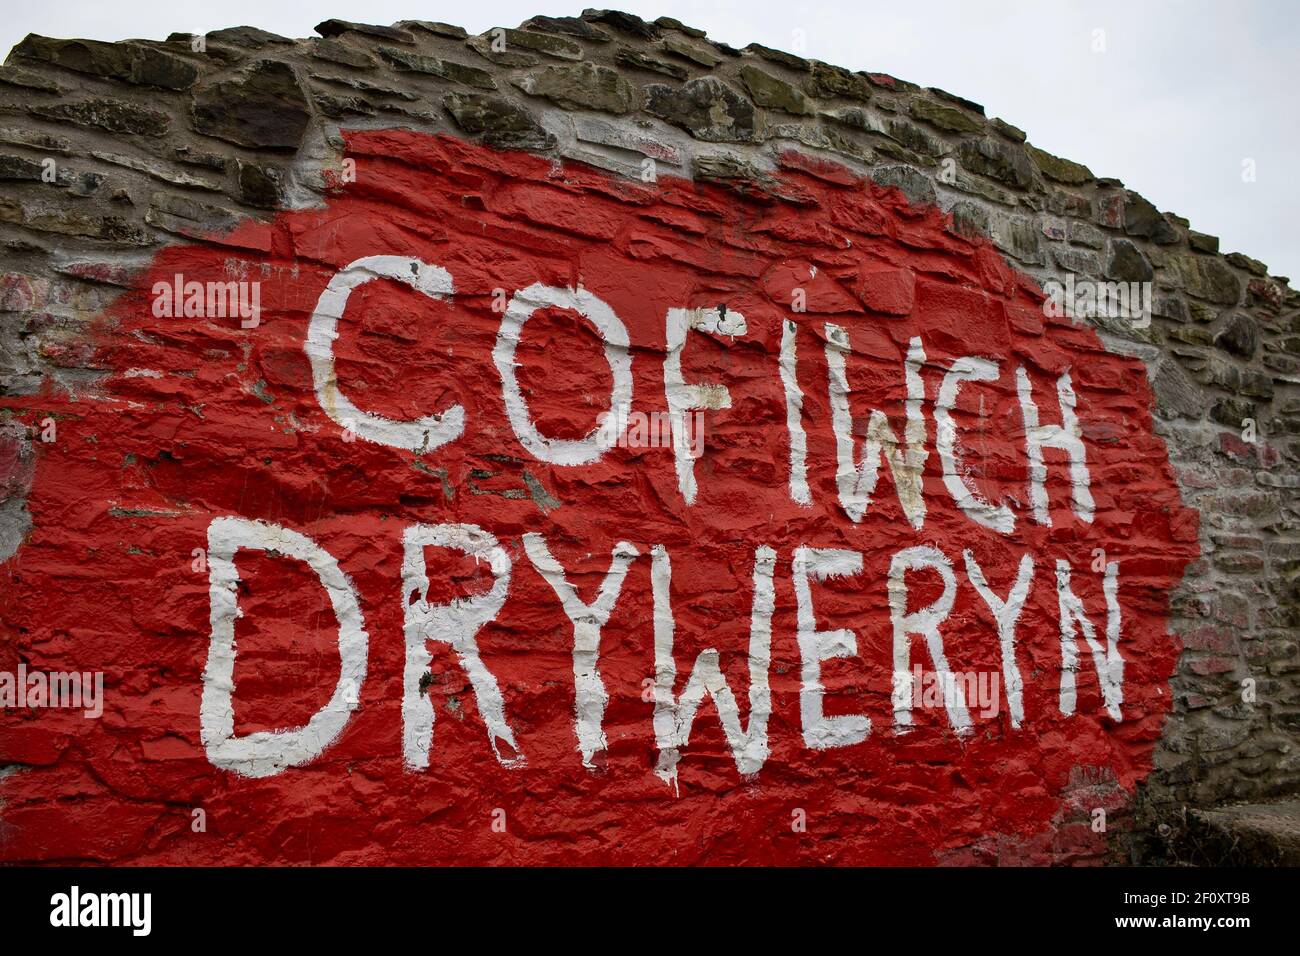 The 'Cofiwch Dryweryn' mural next to the A487 road near Llanrhystud on the 7th March 2021. Credit: Lewis Mitchell Stock Photo